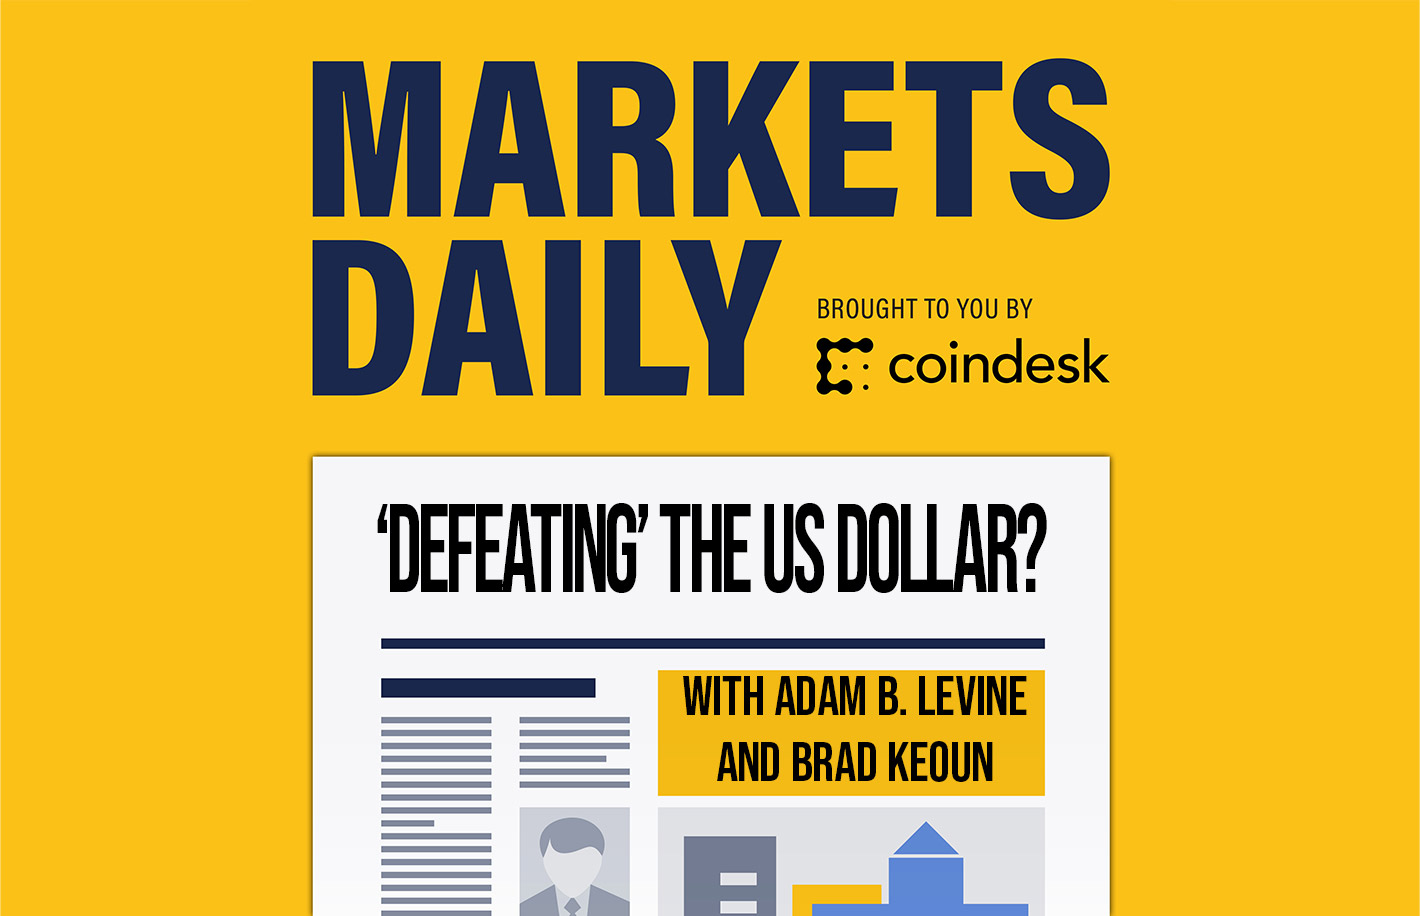 MARKETS DAILY: Defeating The ‘Domination’ Of The US Dollar